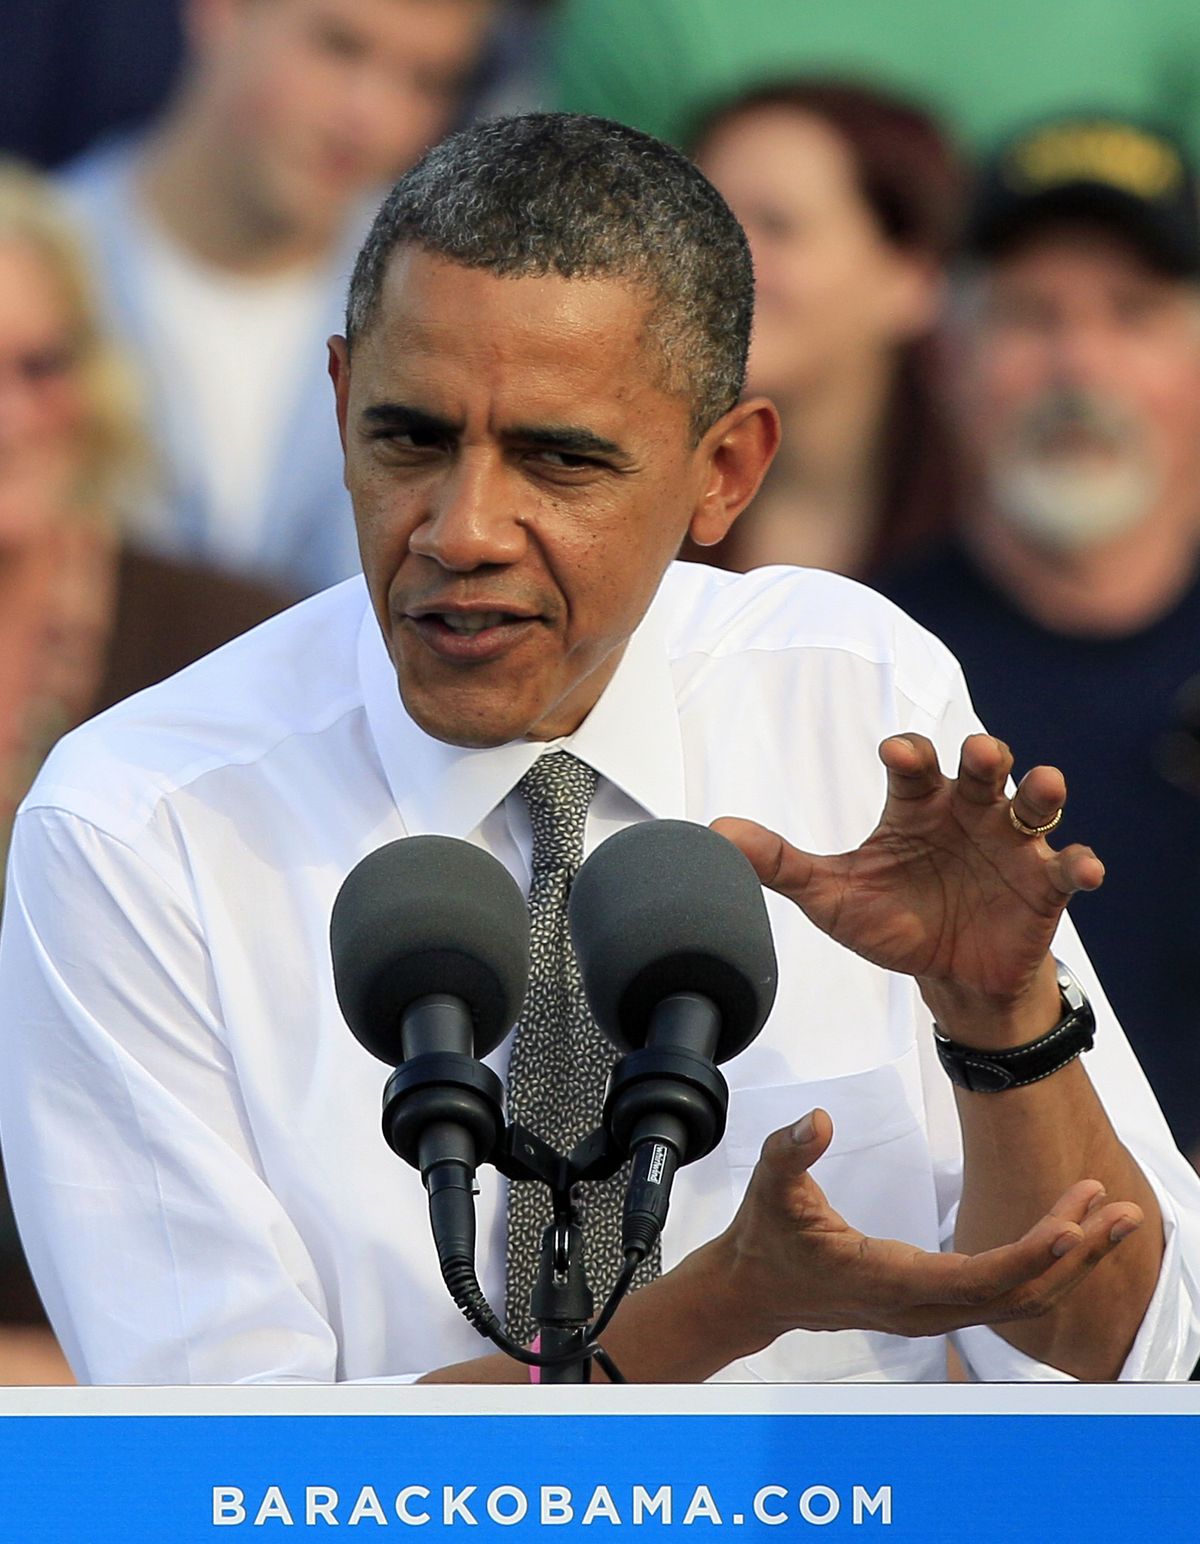 Obama appears at a rally Tuesday in Dayton, Ohio. (Associated Press)